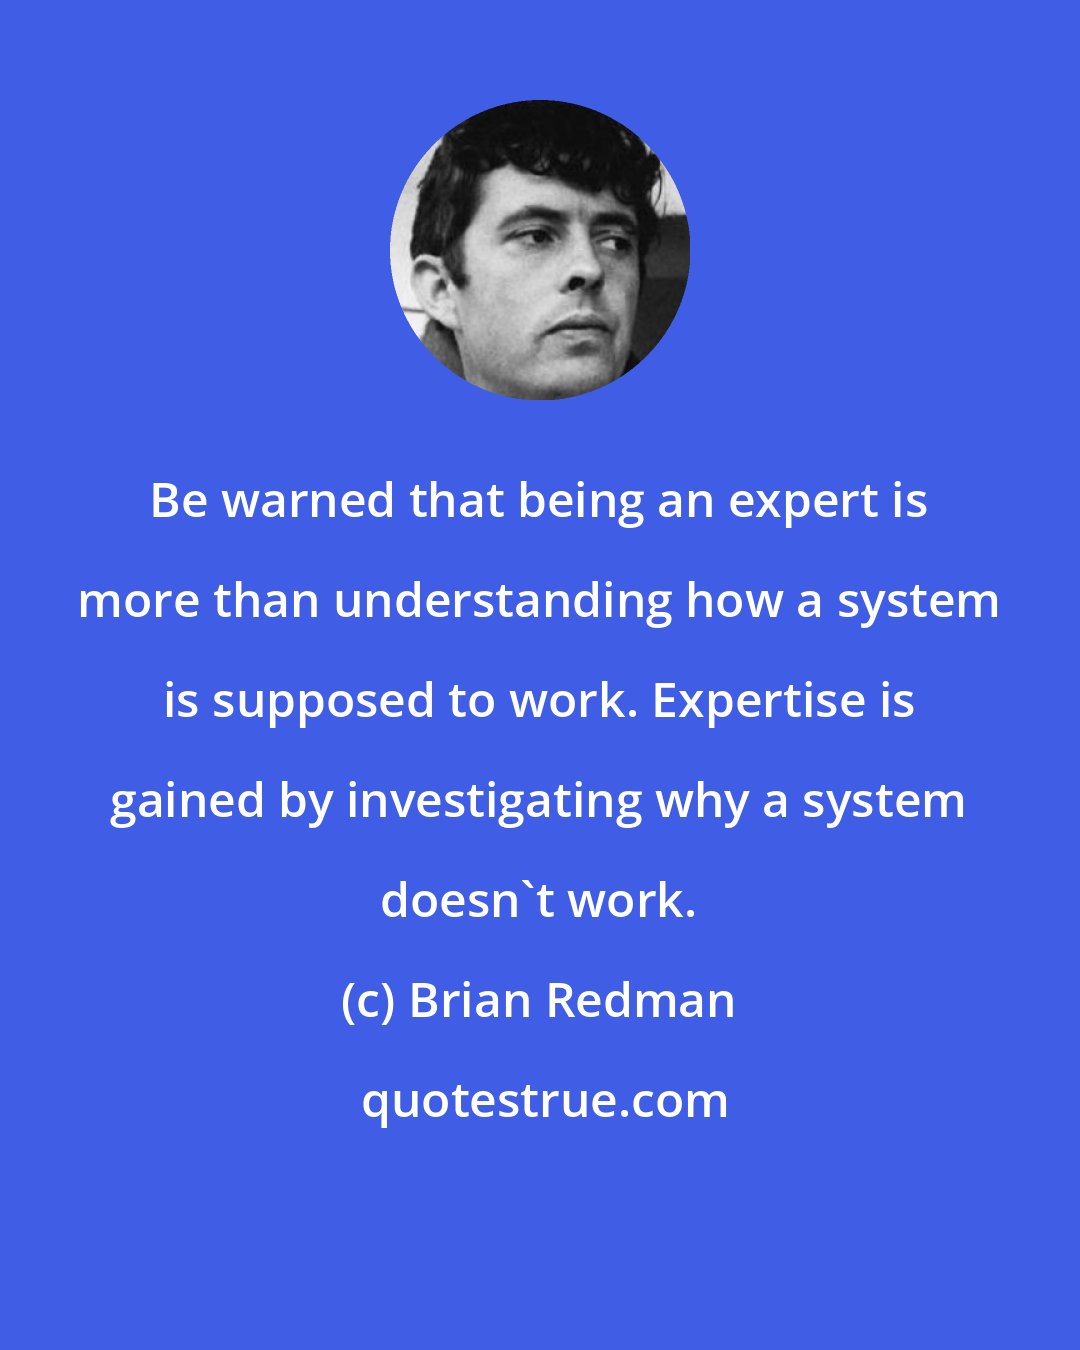 Brian Redman: Be warned that being an expert is more than understanding how a system is supposed to work. Expertise is gained by investigating why a system doesn't work.